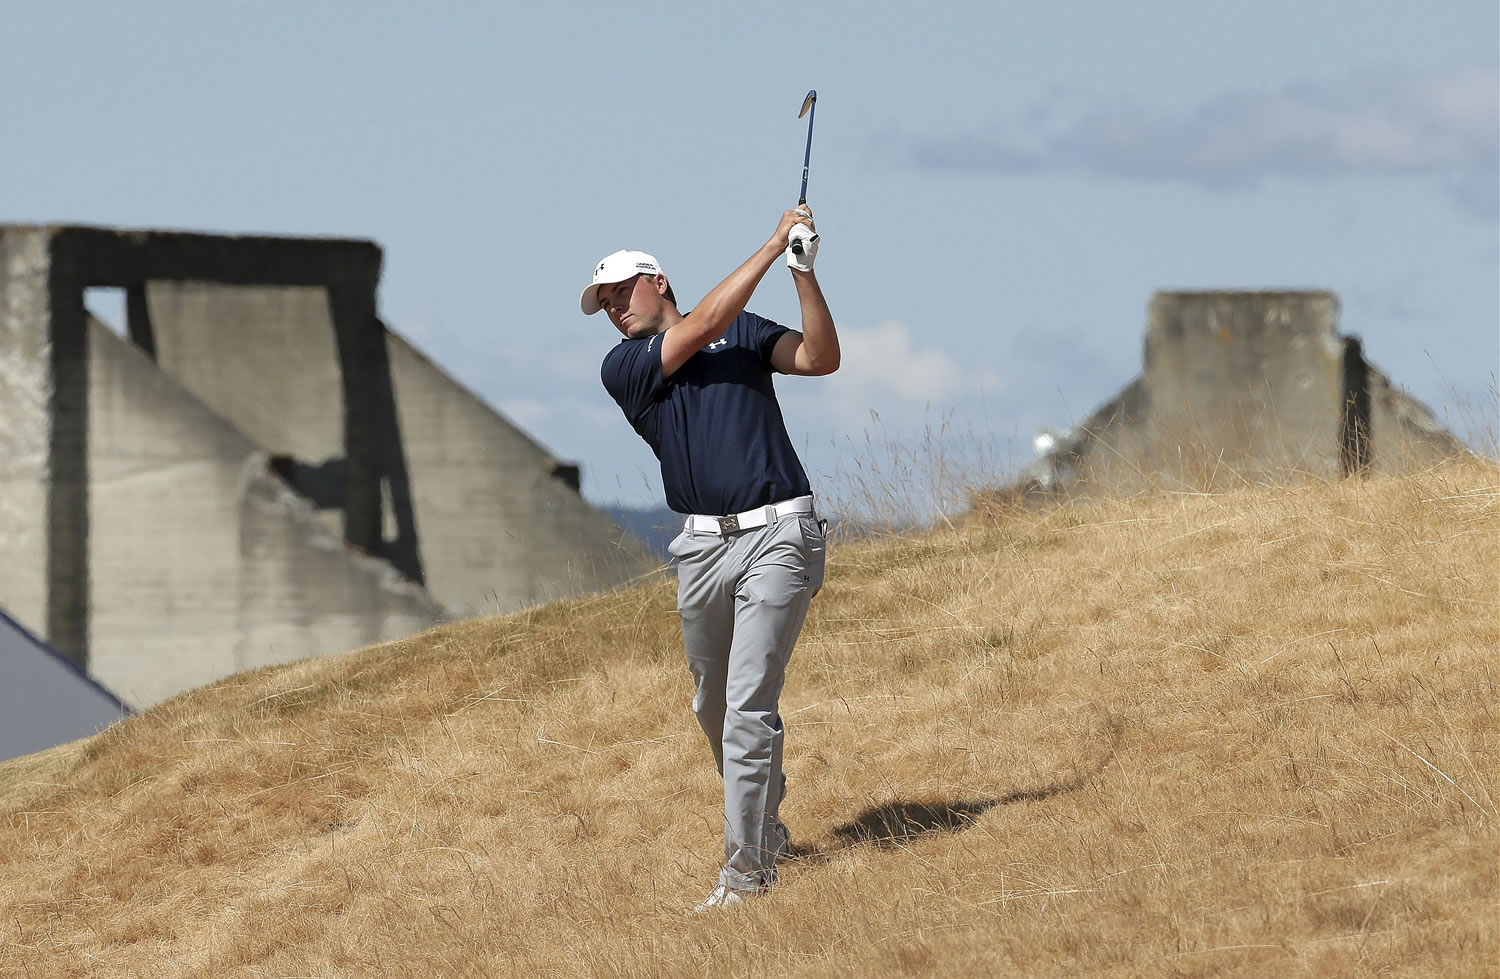 Jordan Spieth hits out of the tall fescue grass on the 18th hole during the second round of the U.S. Open golf tournament at Chambers Bay on Friday in University Place.